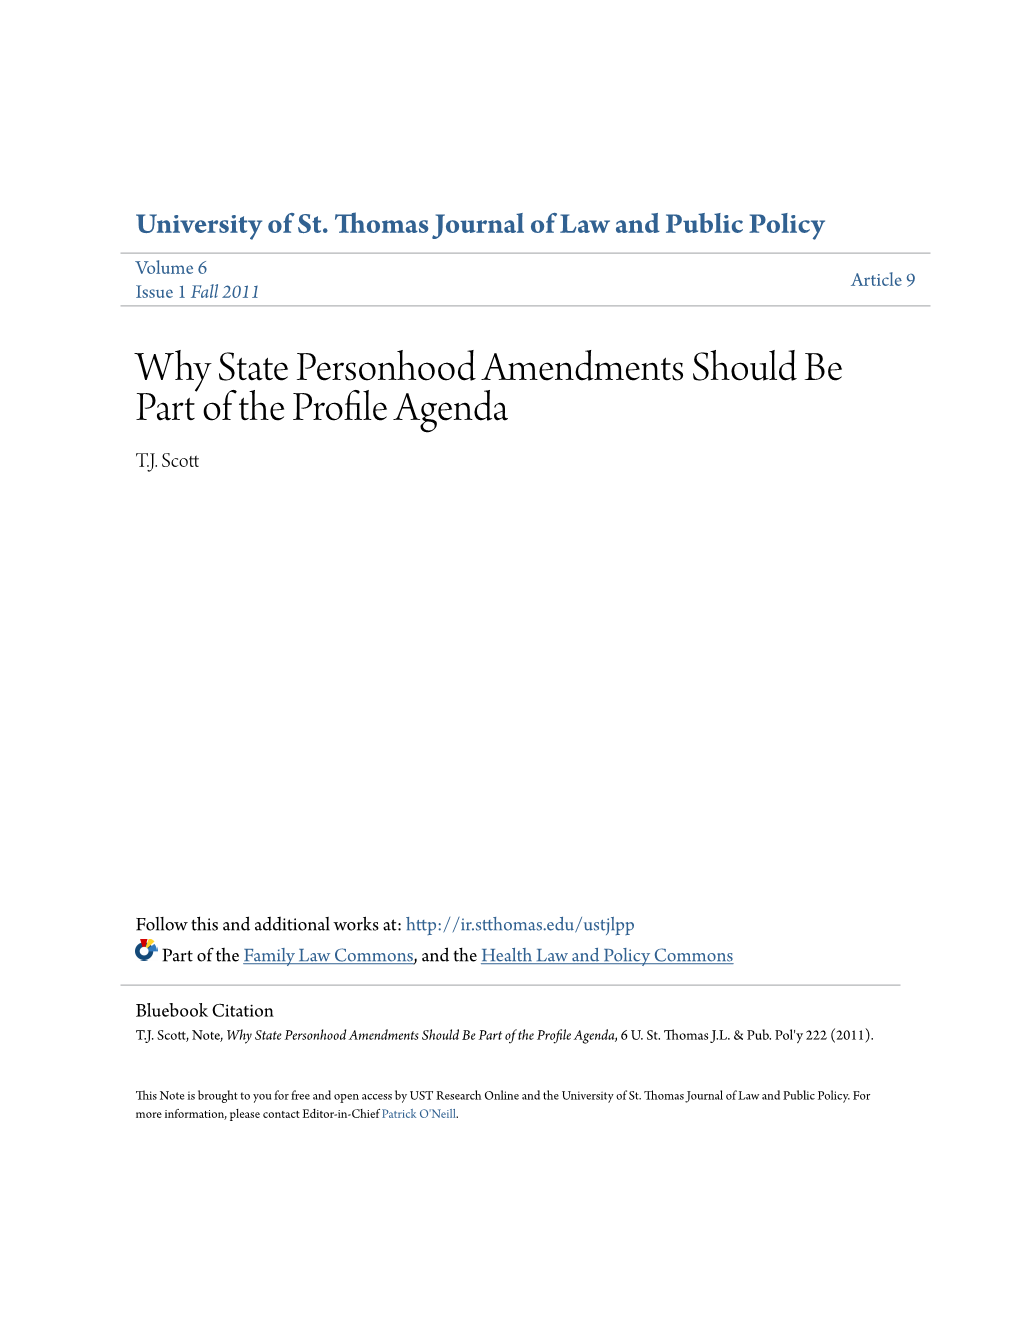 Why State Personhood Amendments Should Be Part of the Profile Agenda T.J